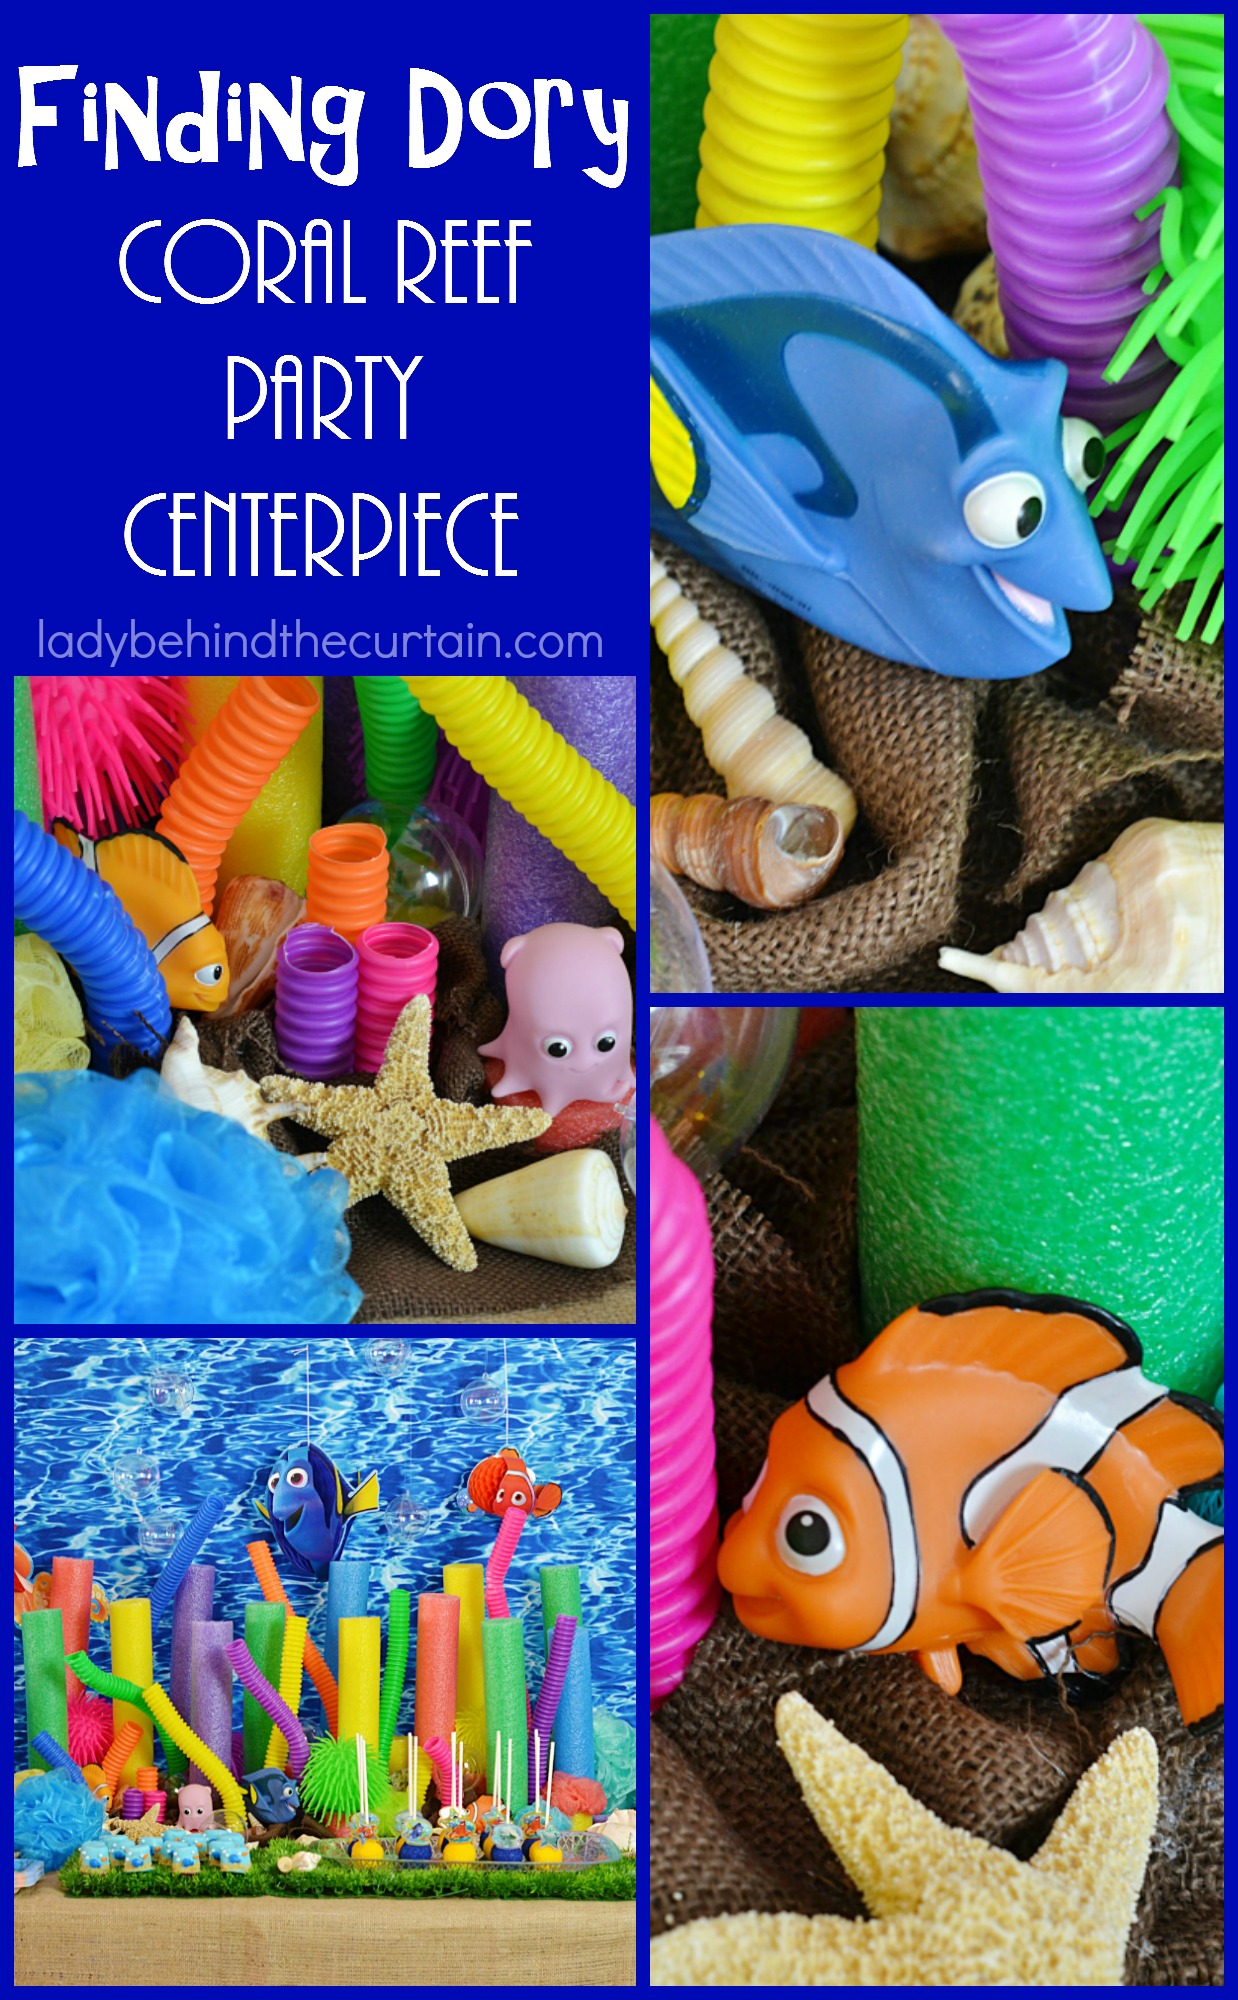 Finding Dory Coral Reef Party Centerpiece | Create a fun and easy centerpiece with inexpensive items and set the tone for a great party. 